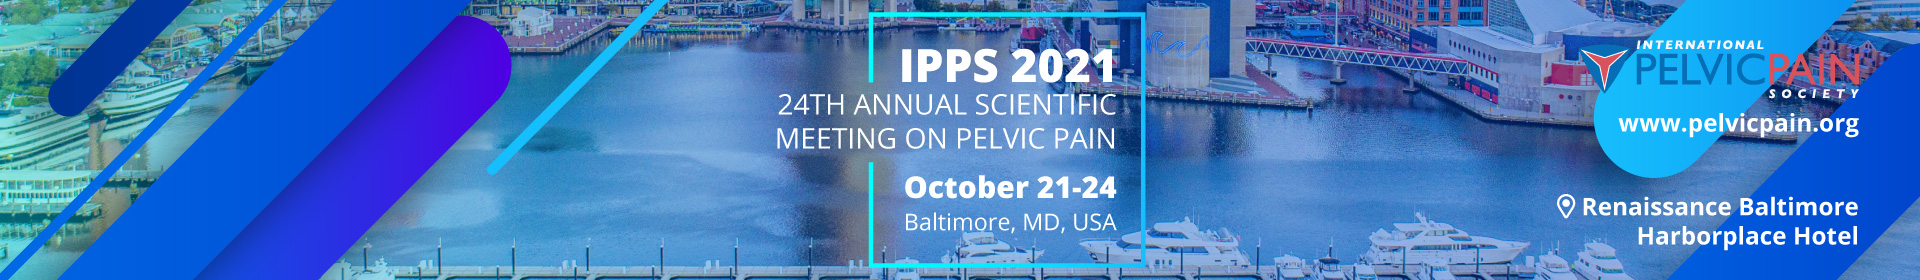 IPPS 2021 Conference Event Banner